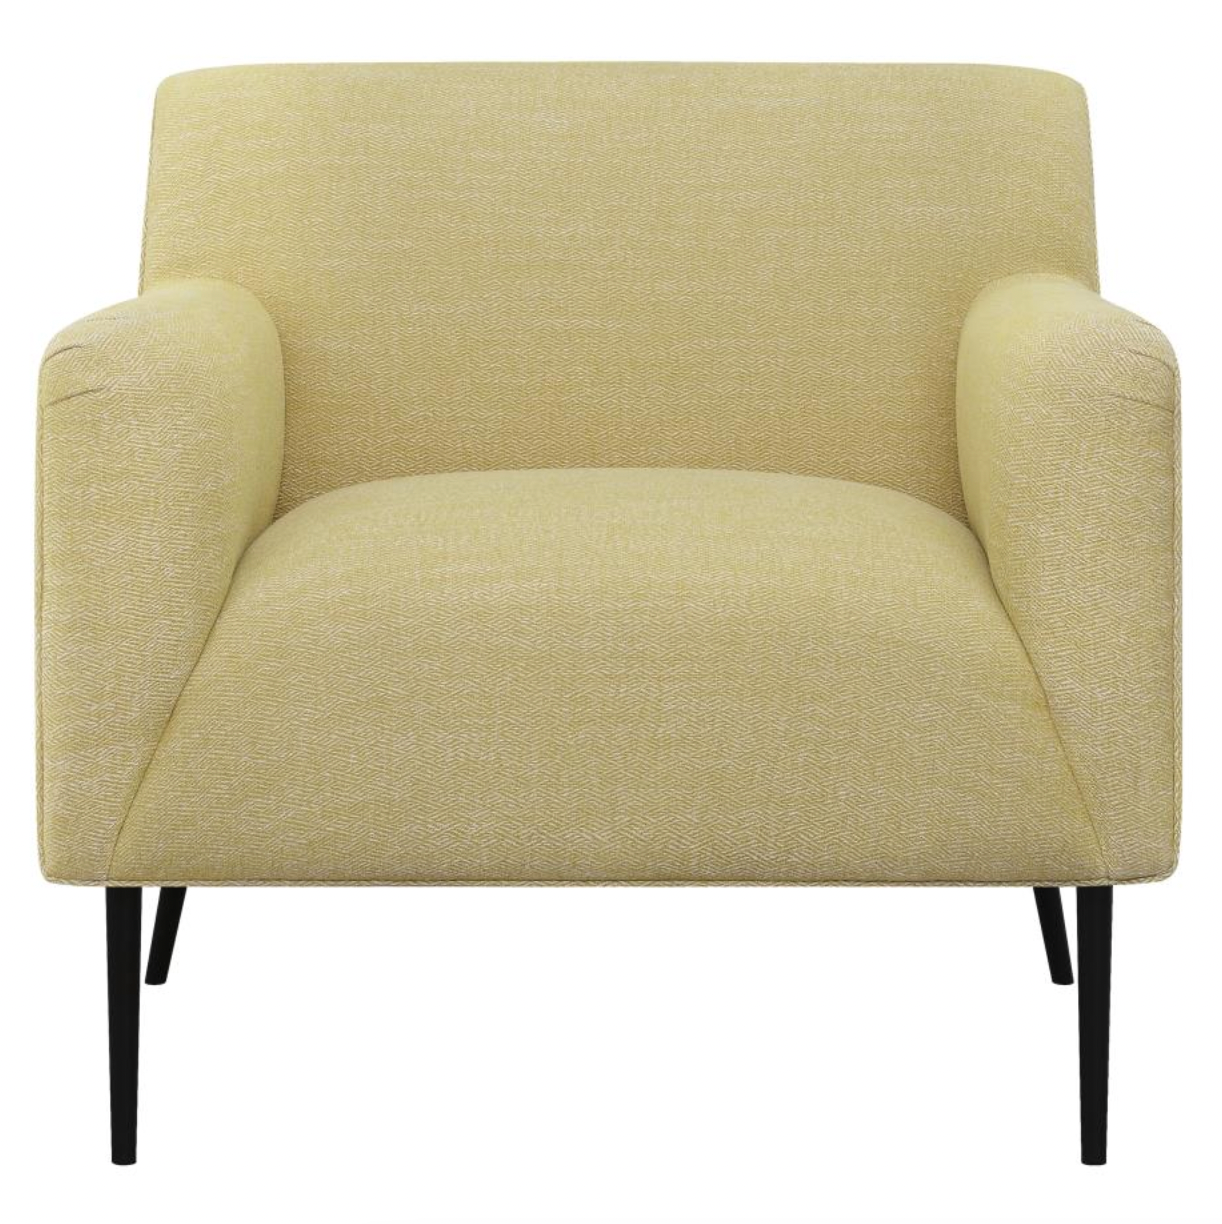 DARLENE Upholstered Track Arms Accent Chair Yellow